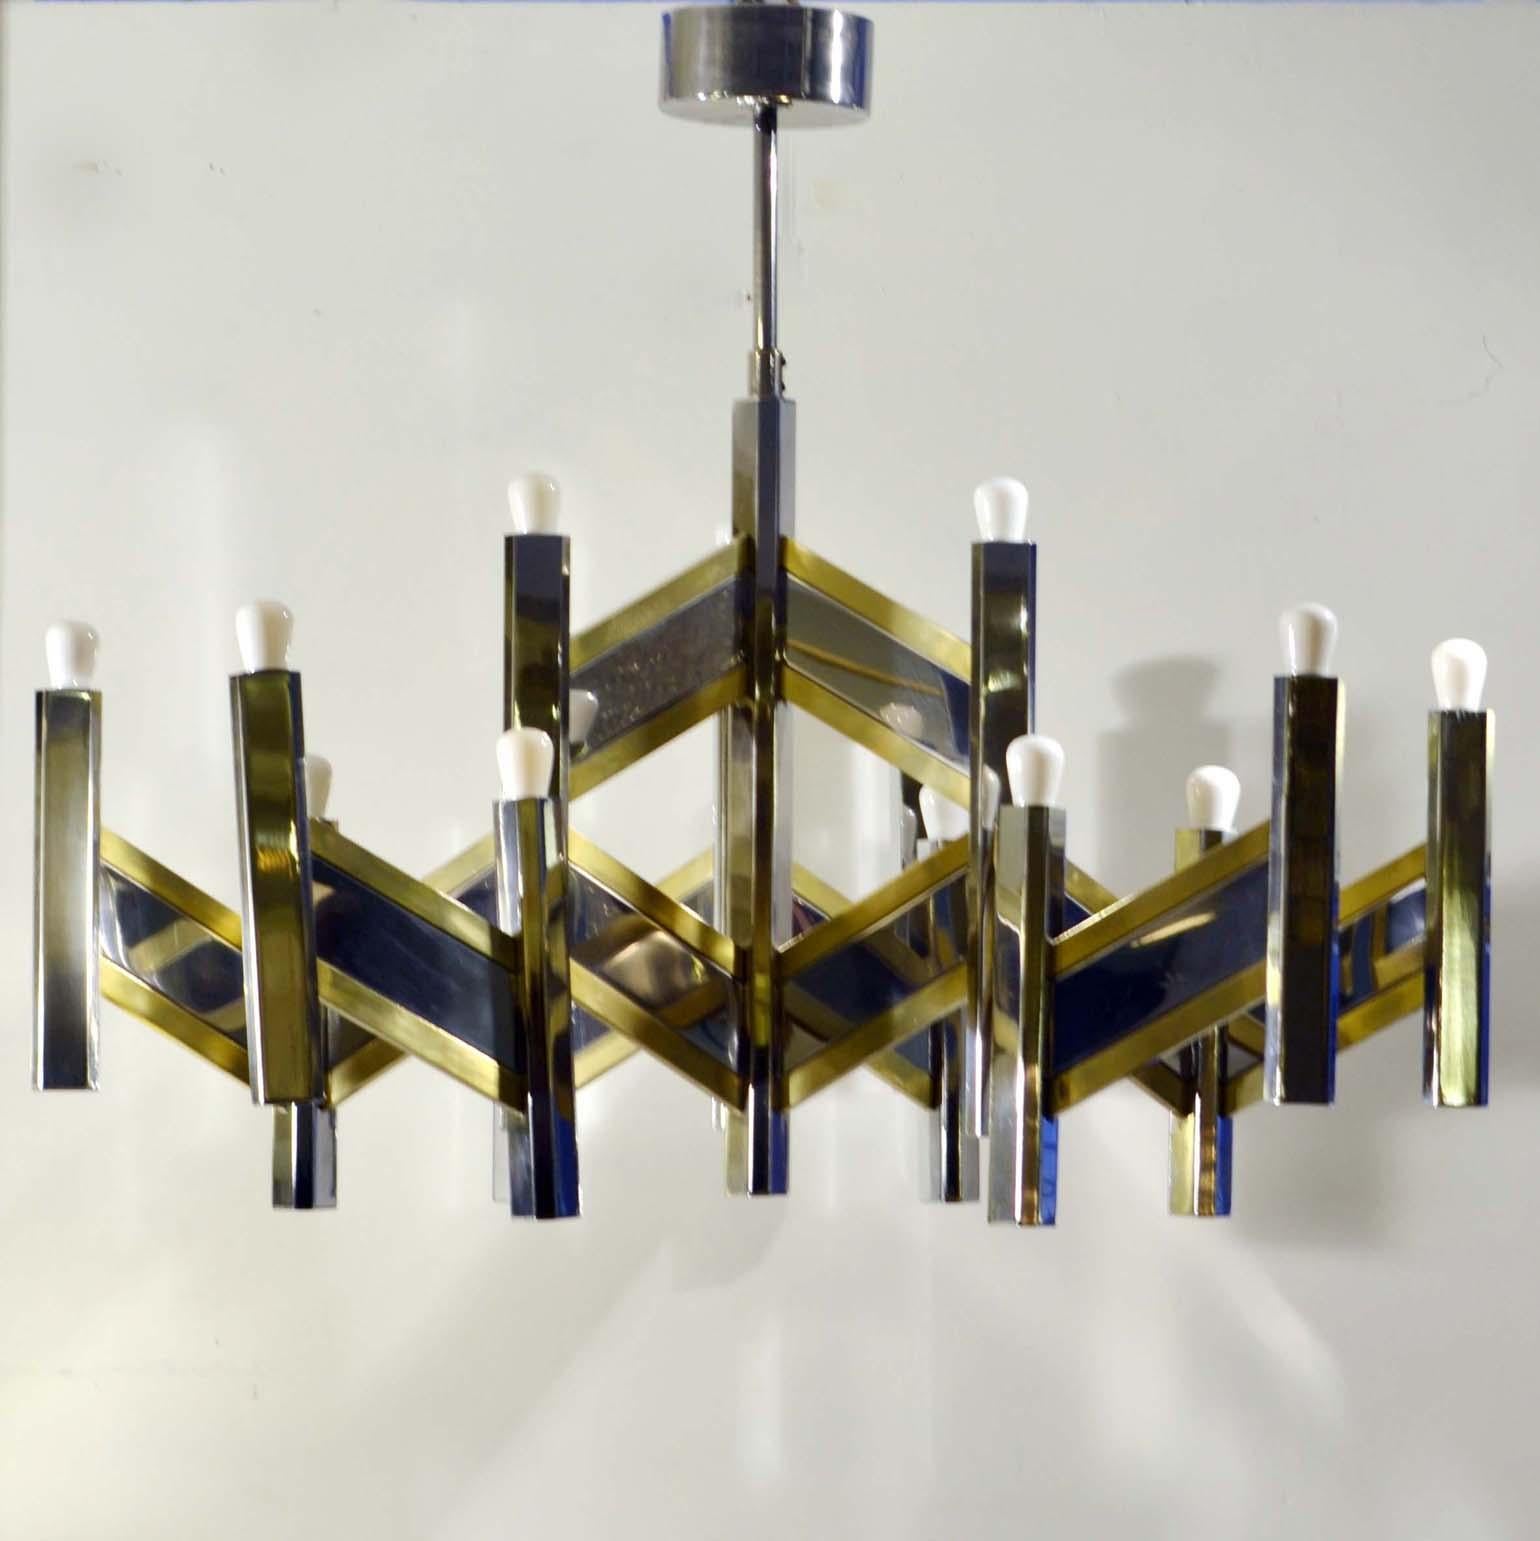 Largest scale sculptural mid century chandelier by the Italian designer Gaetano Sciolari for Lightolier, circa 1970, made in high quality polished brass and chrome mix creating a mirror surface. It consists of a center hexagonal column from which 3